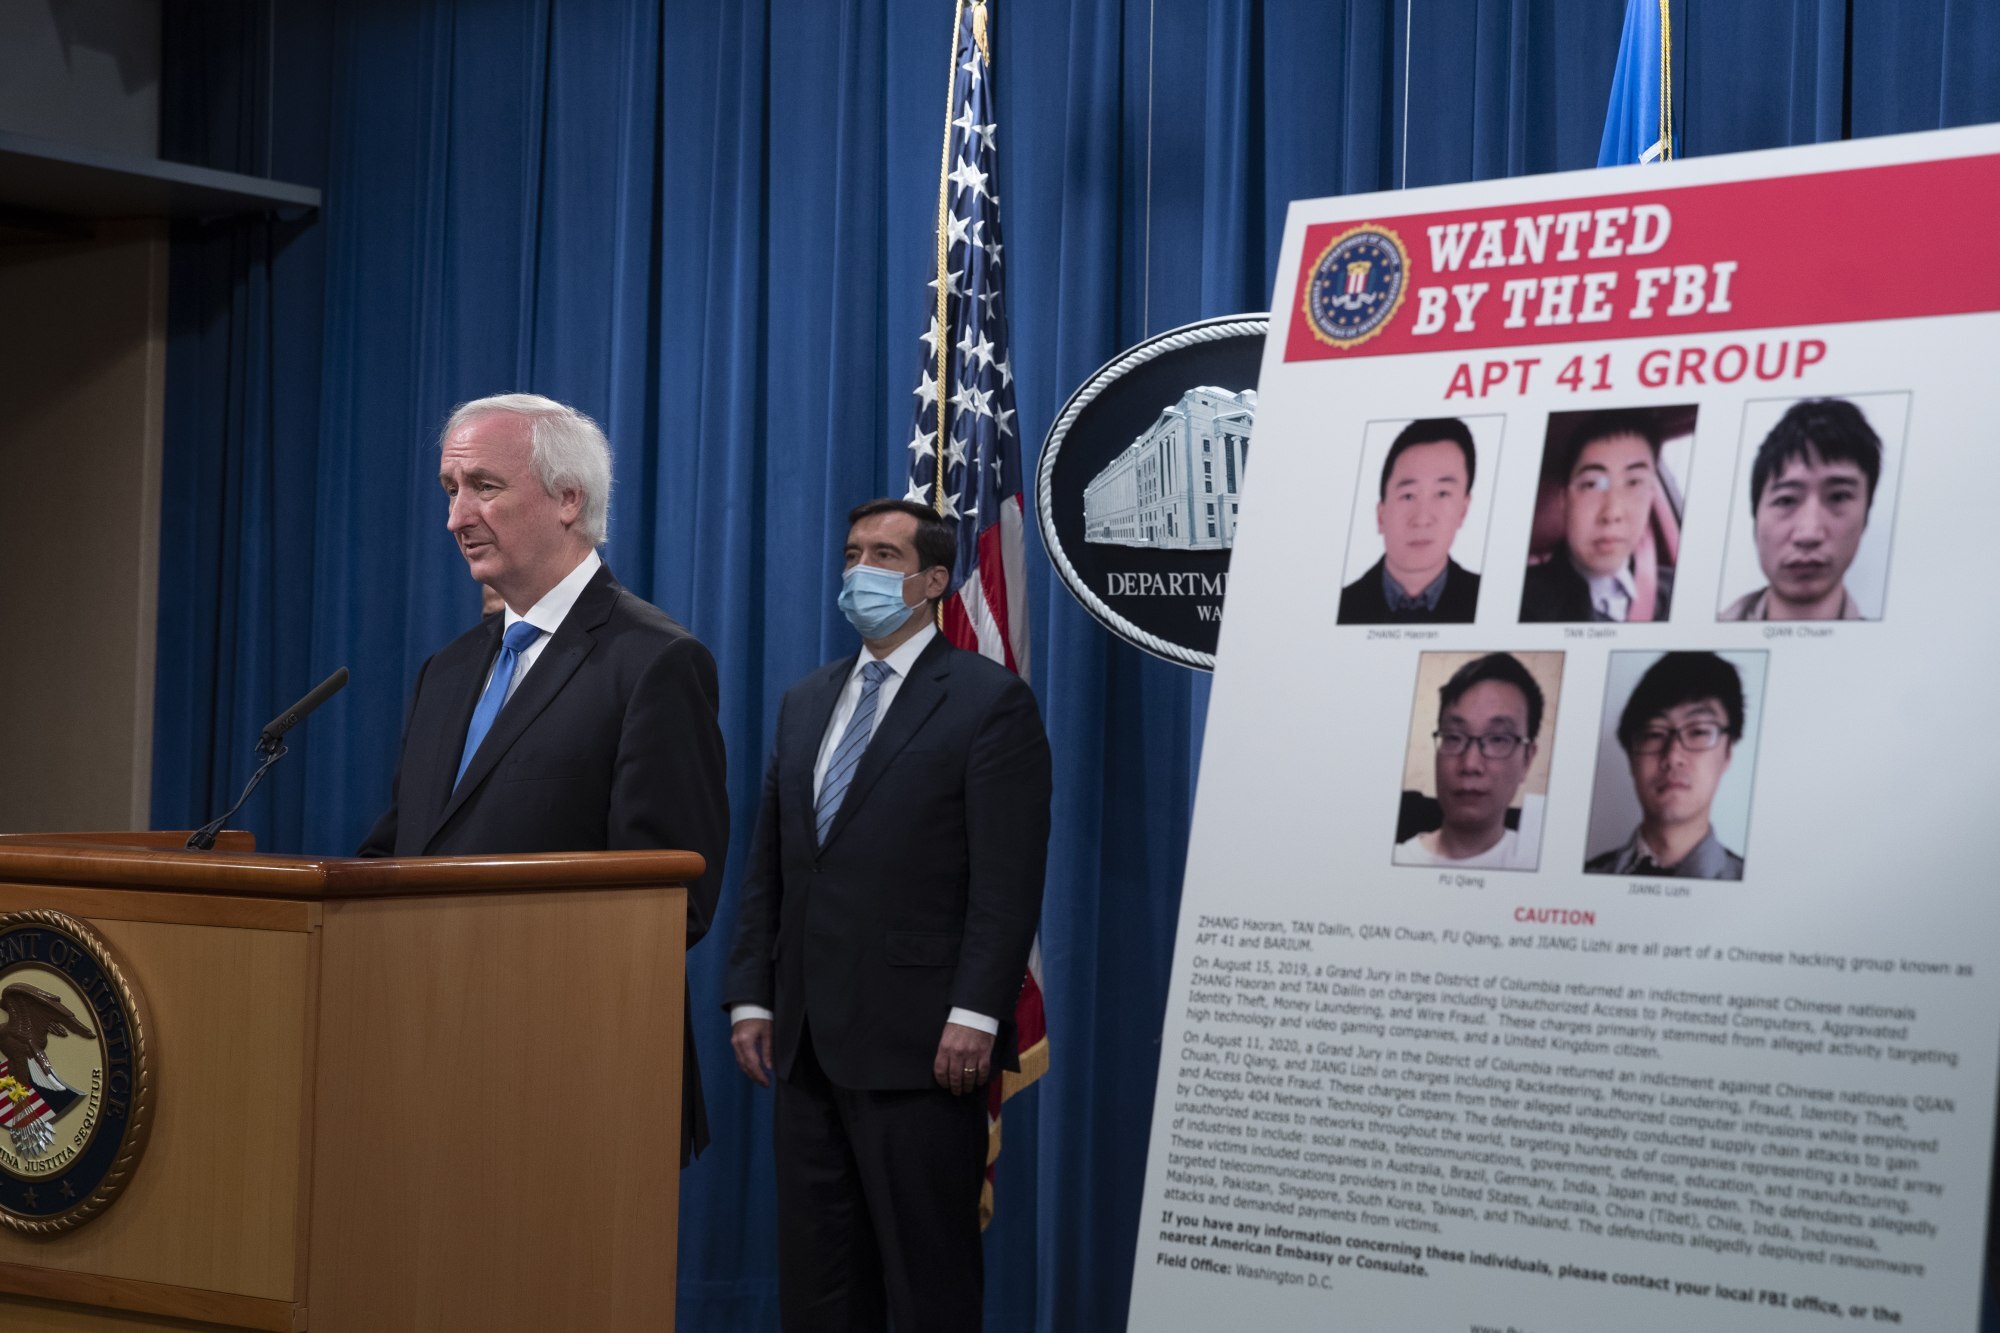 US Deputy Attorney General Jeffrey Rosen announcing charges on September 16, 2020, related to a computer intrusion campaign by the APT41 hacking group, which has ties to the Chinese government. Photo: EPA-EFE